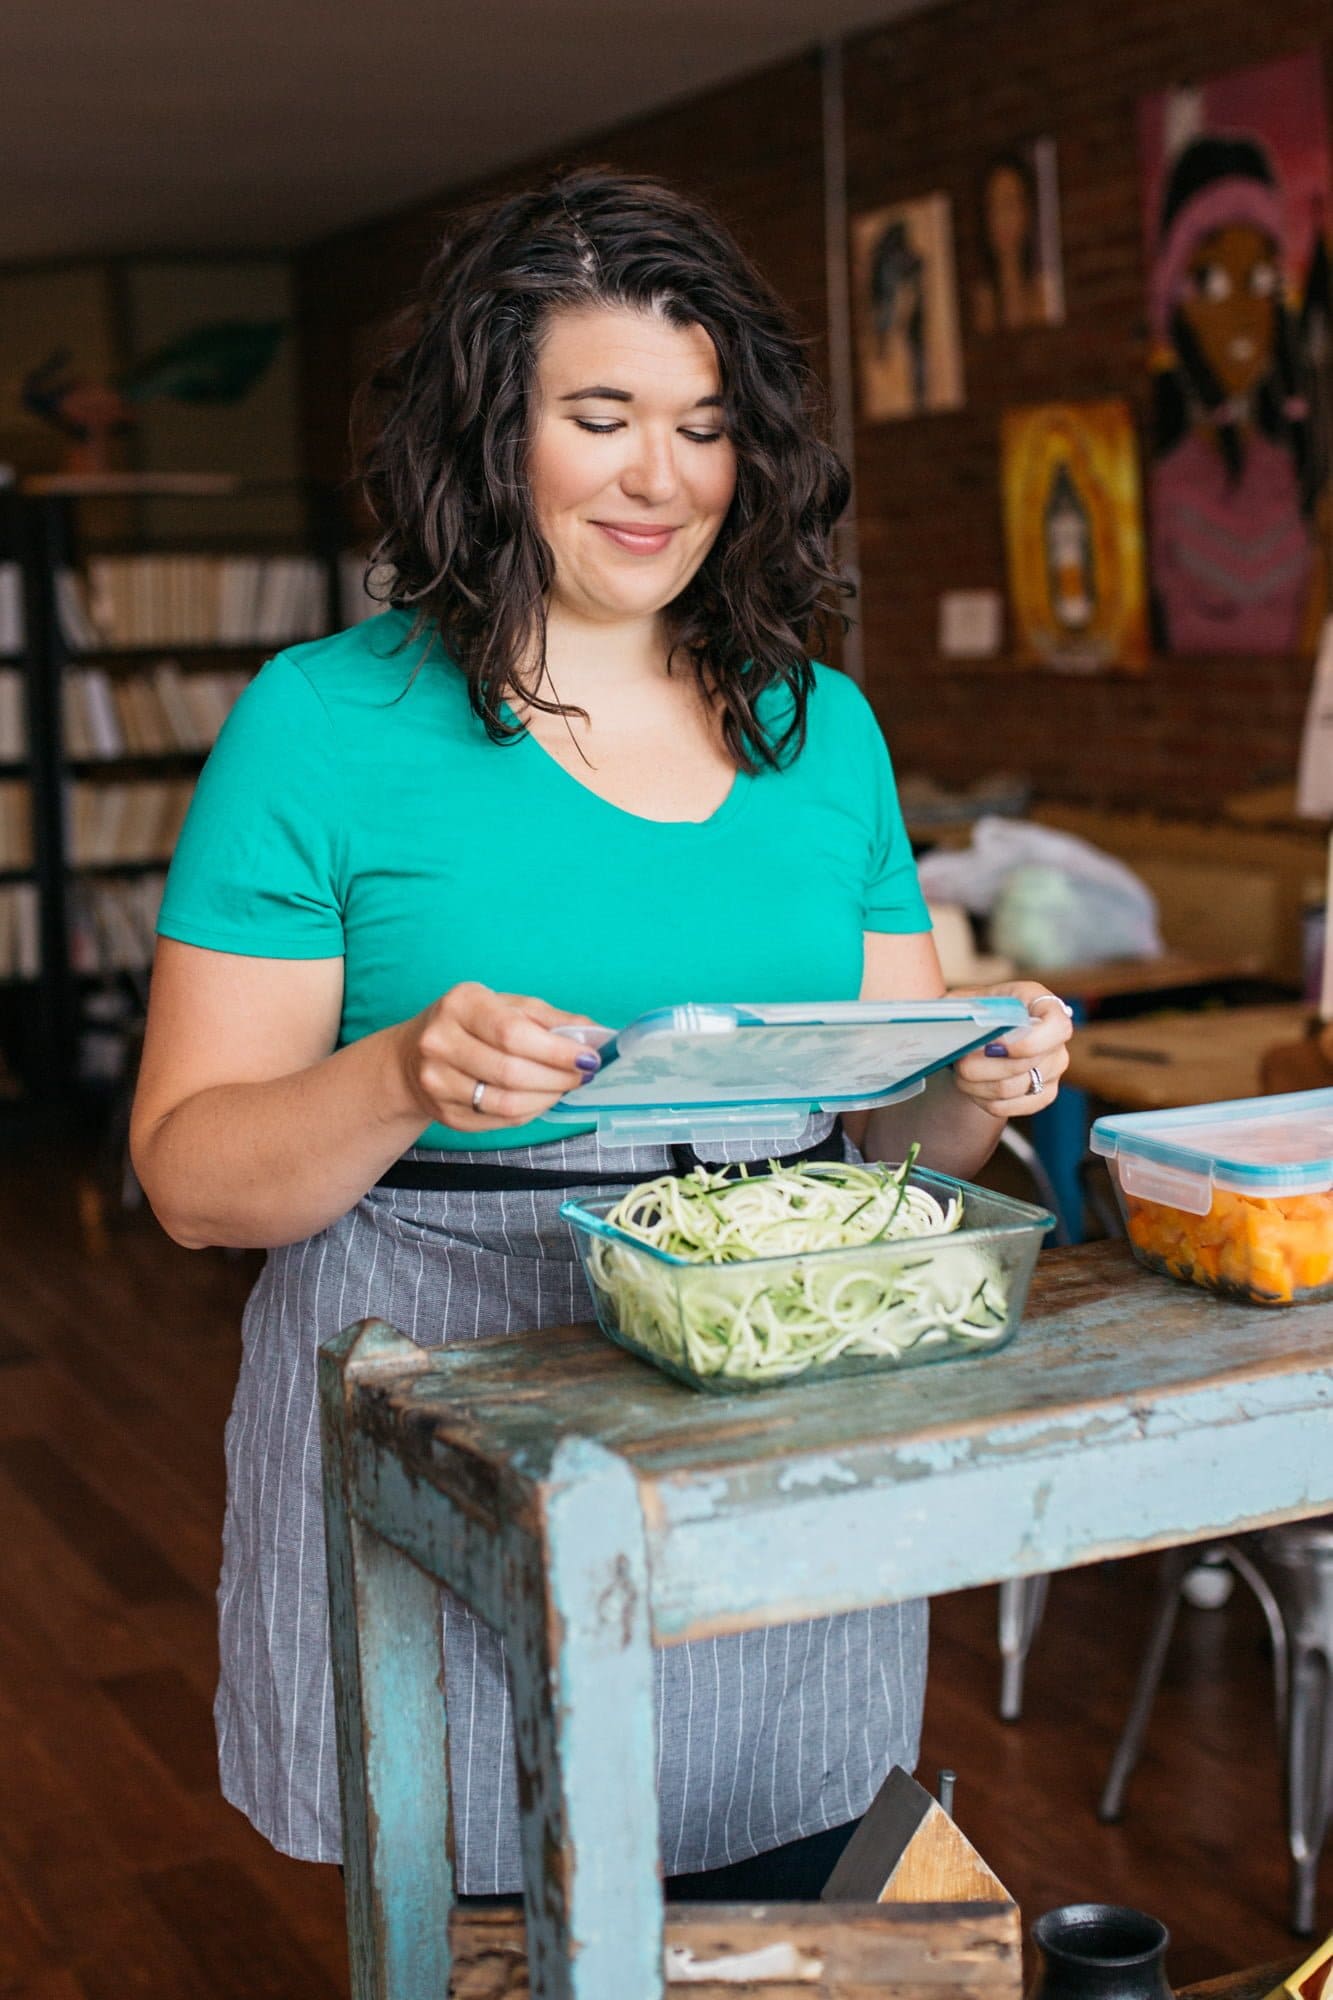 Brunette woman in a teal shirt putting the lid on a glass container filled with zucchini noodles.